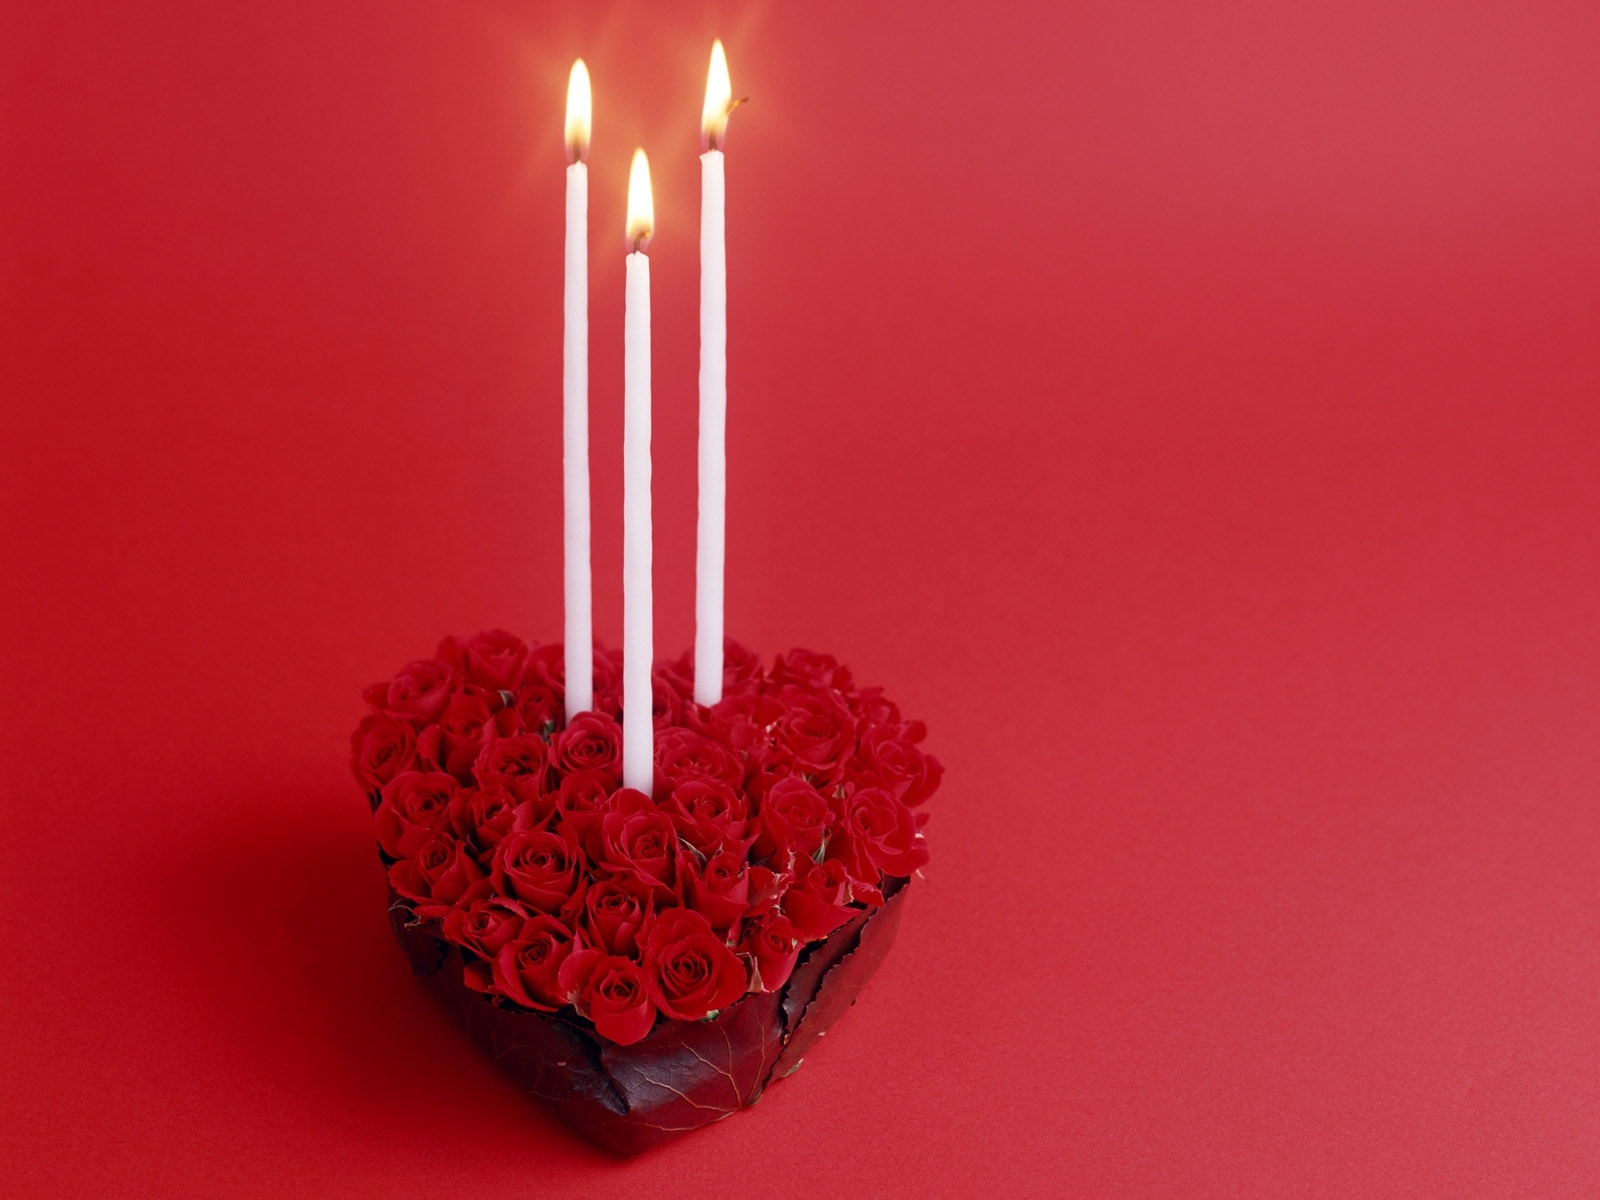 valentine's day, holidays, roses, hearts, candles, postcards, red